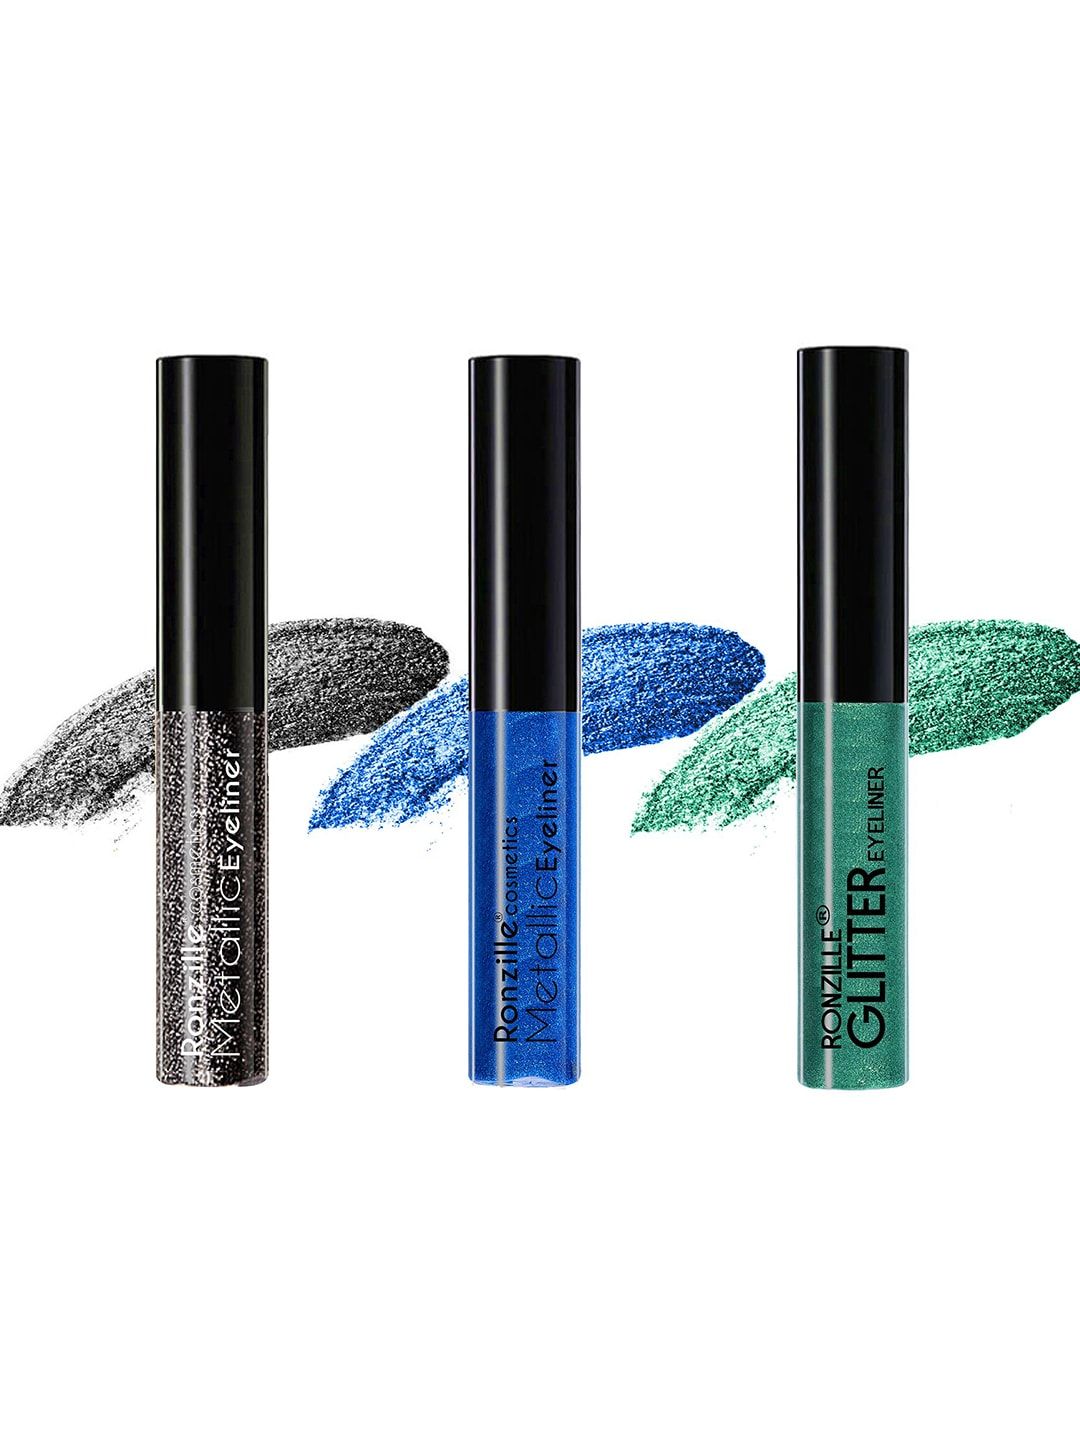 Ronzille Pack Of 3 Glitter Eyeliners Price in India